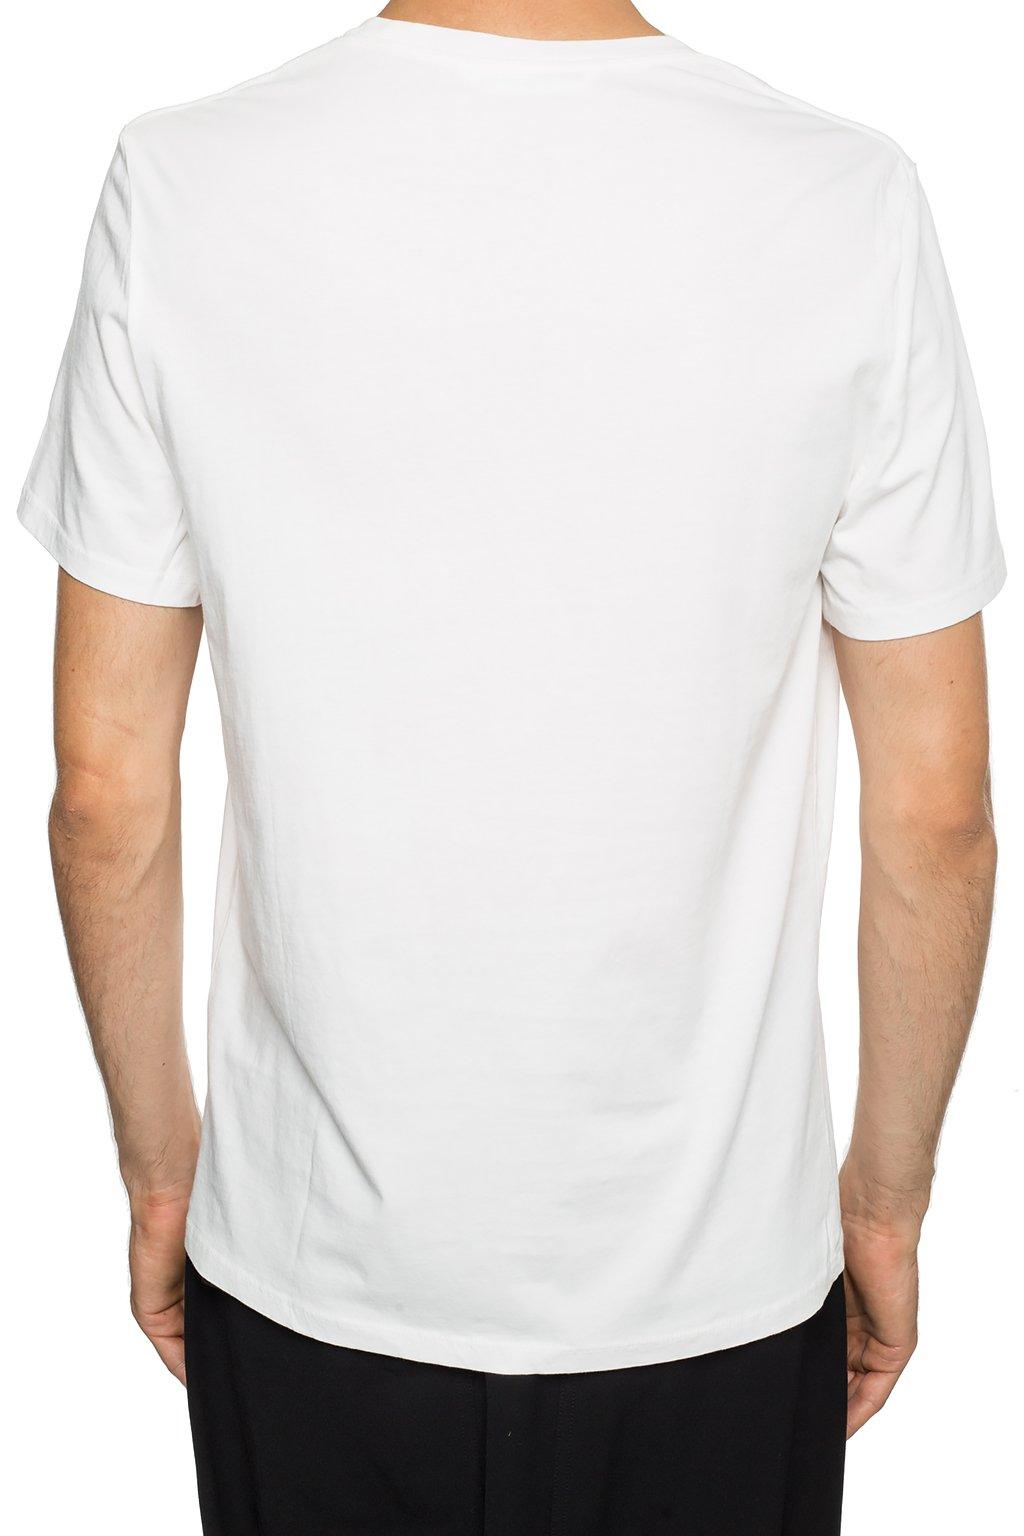 Zadig & Voltaire Cotton Printed T-shirt in White for Men - Lyst